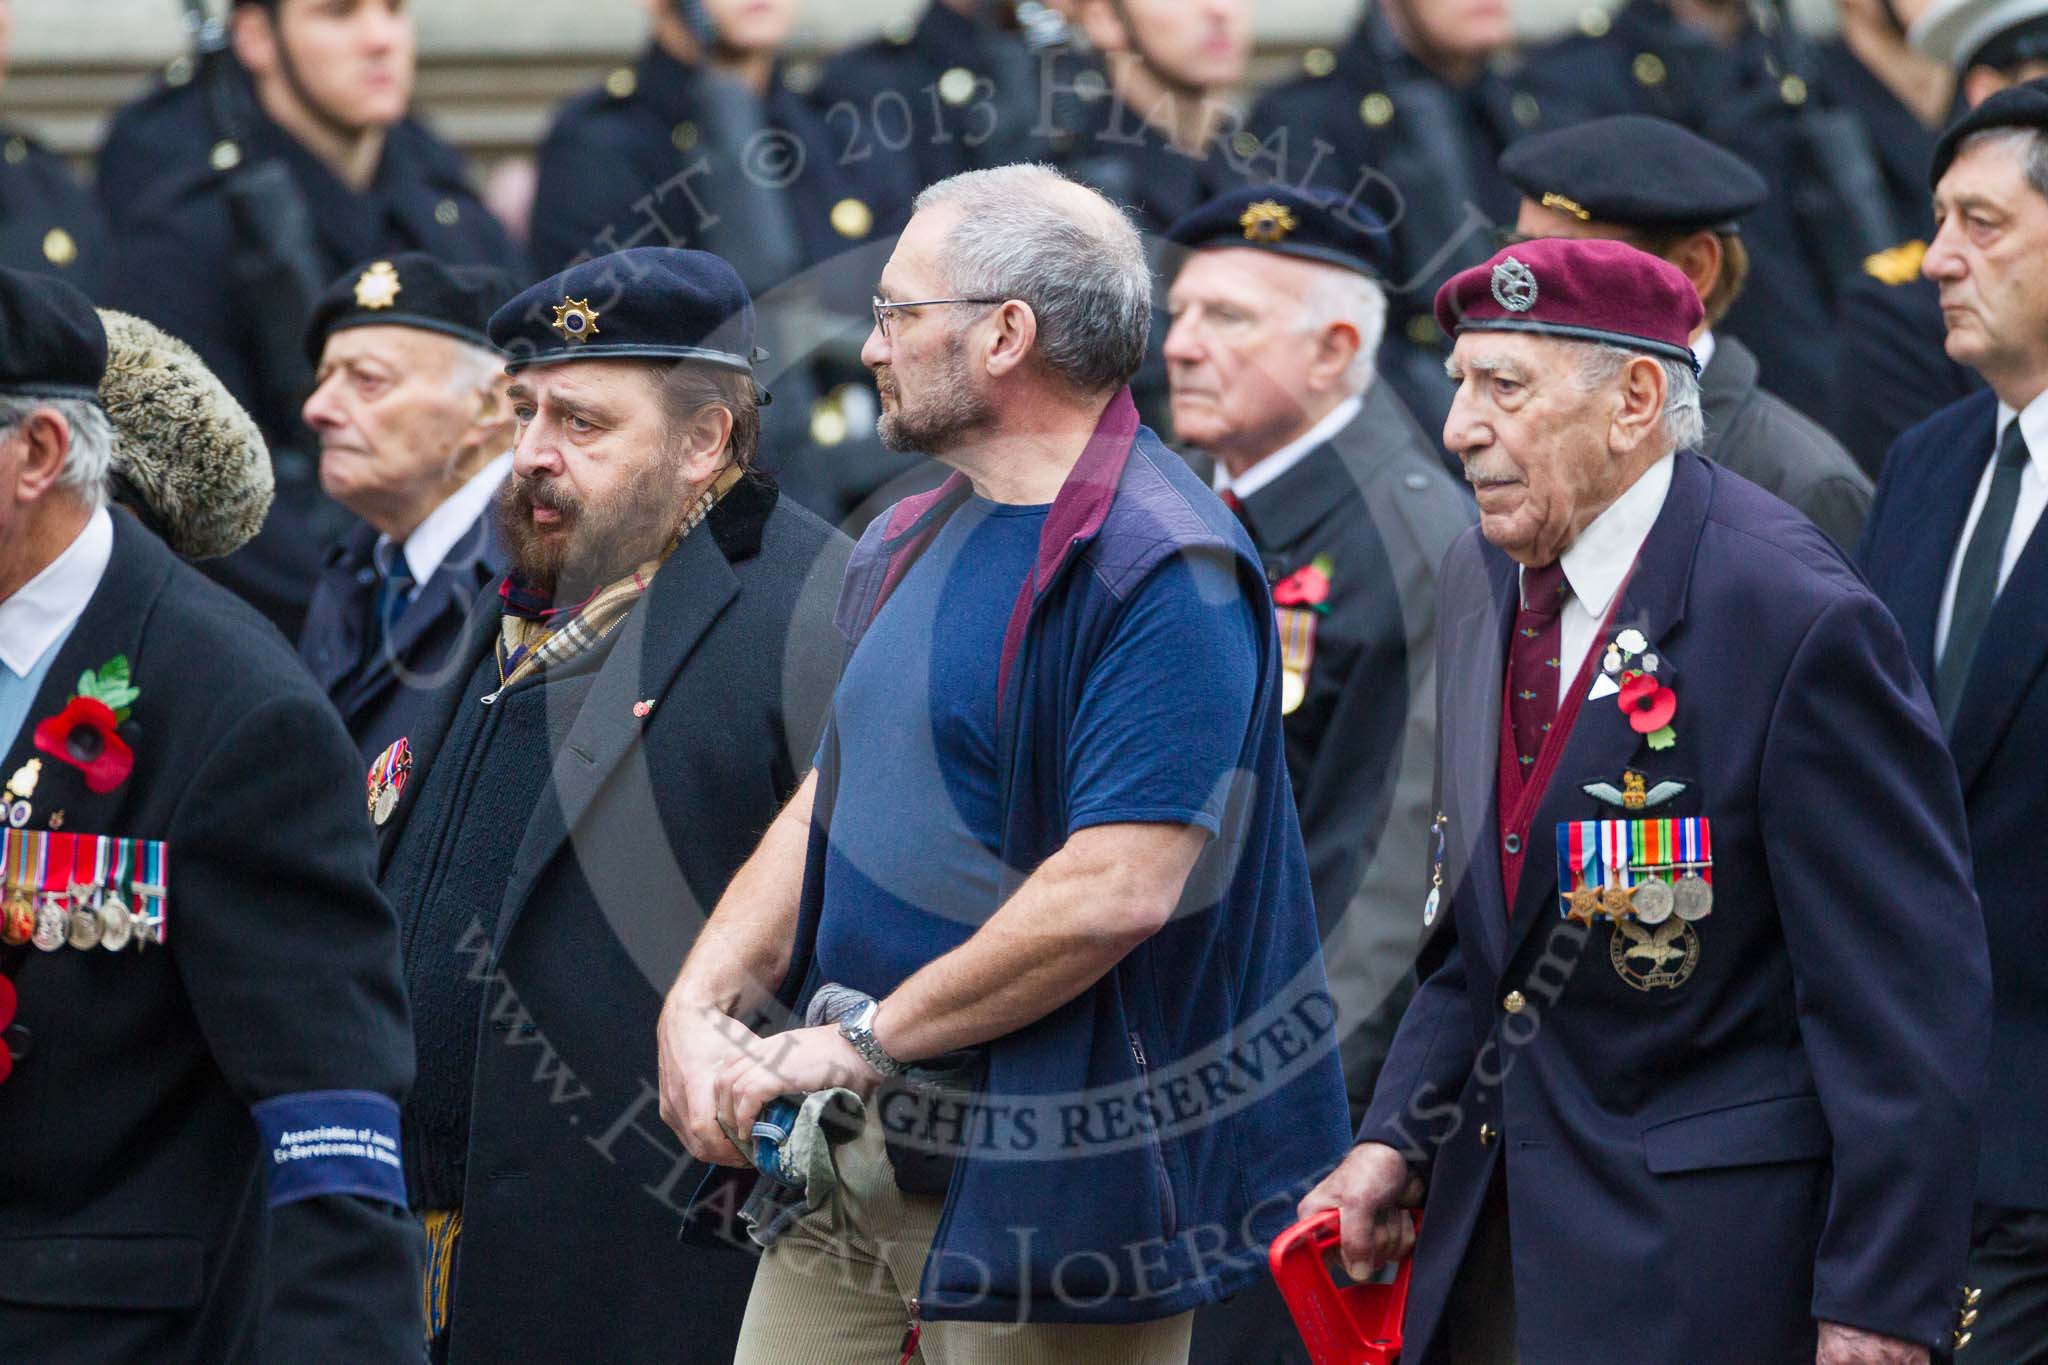 Remembrance Sunday at the Cenotaph 2015: Group D13, Association of Jewish Ex-Servicemen & Women.
Cenotaph, Whitehall, London SW1,
London,
Greater London,
United Kingdom,
on 08 November 2015 at 11:53, image #648